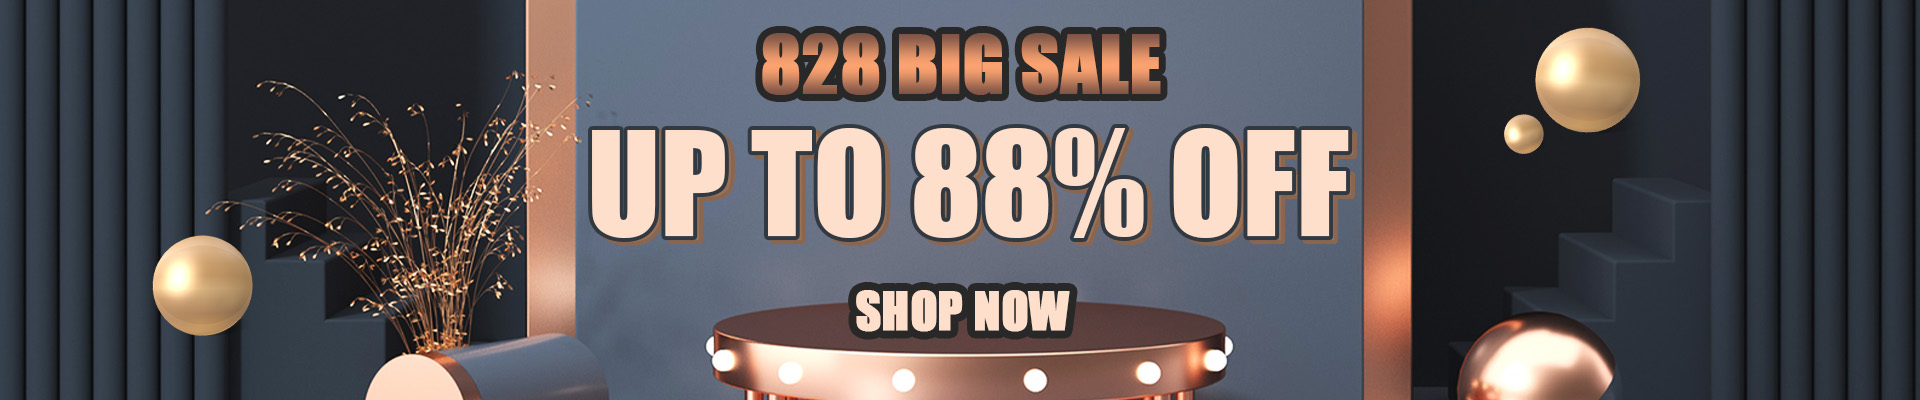 828 BIG SALE, UP TO 88% OFF